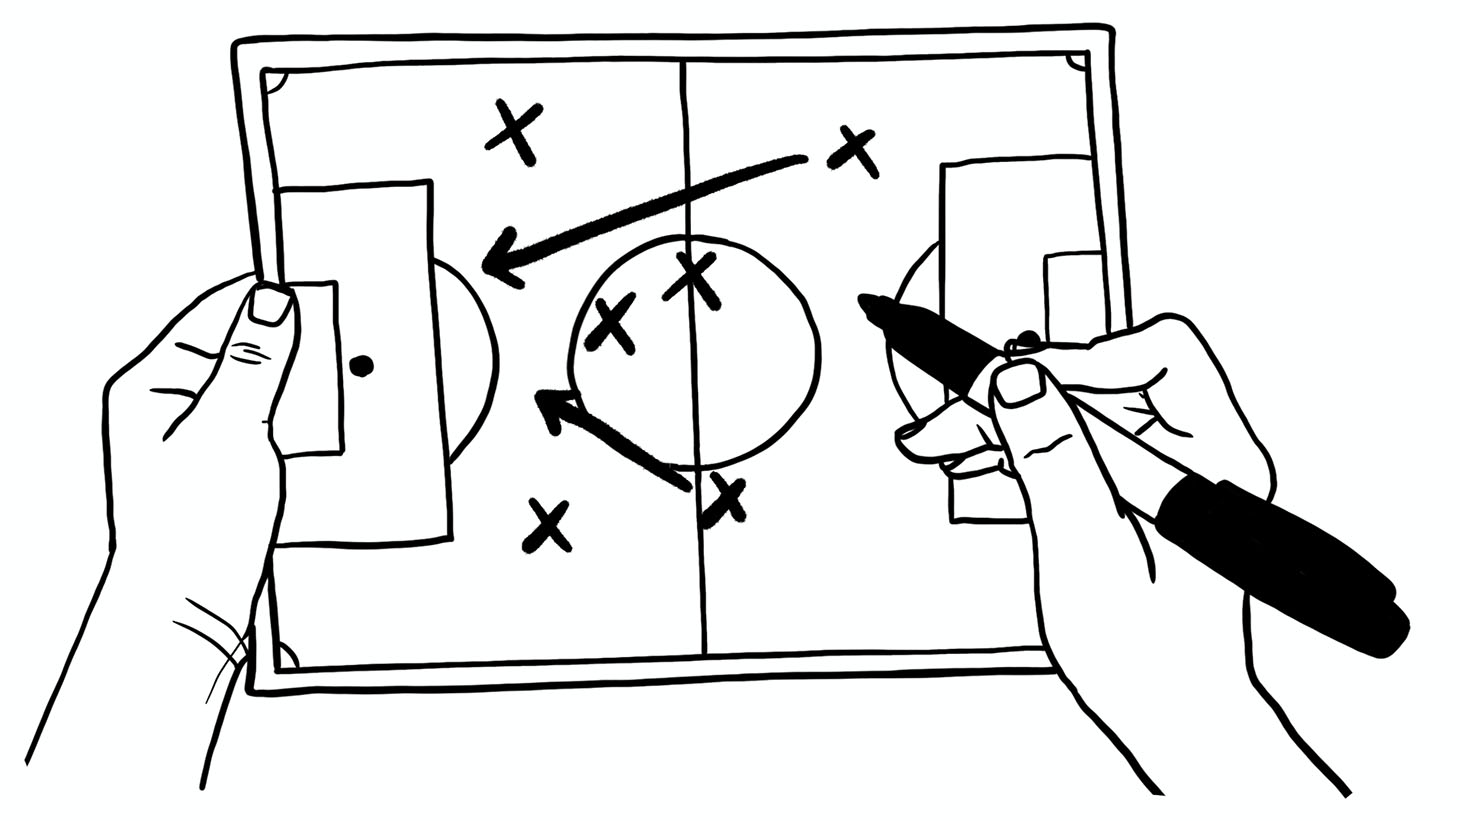 Illustration of a sketched team play plan on a soccer pitch.